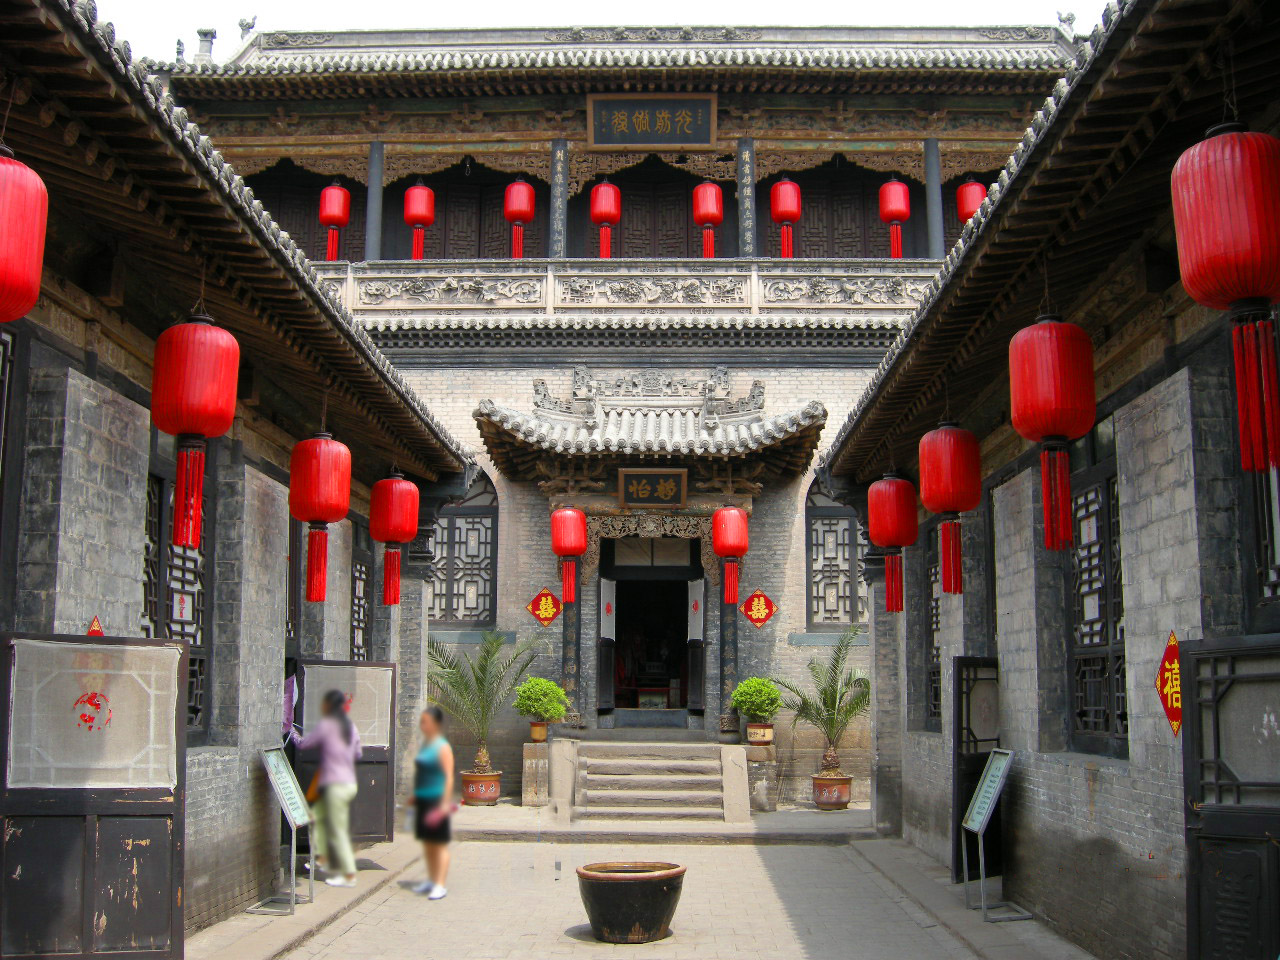 The Qiao Family Courtyard is a masterpiece of traditional civil architecture